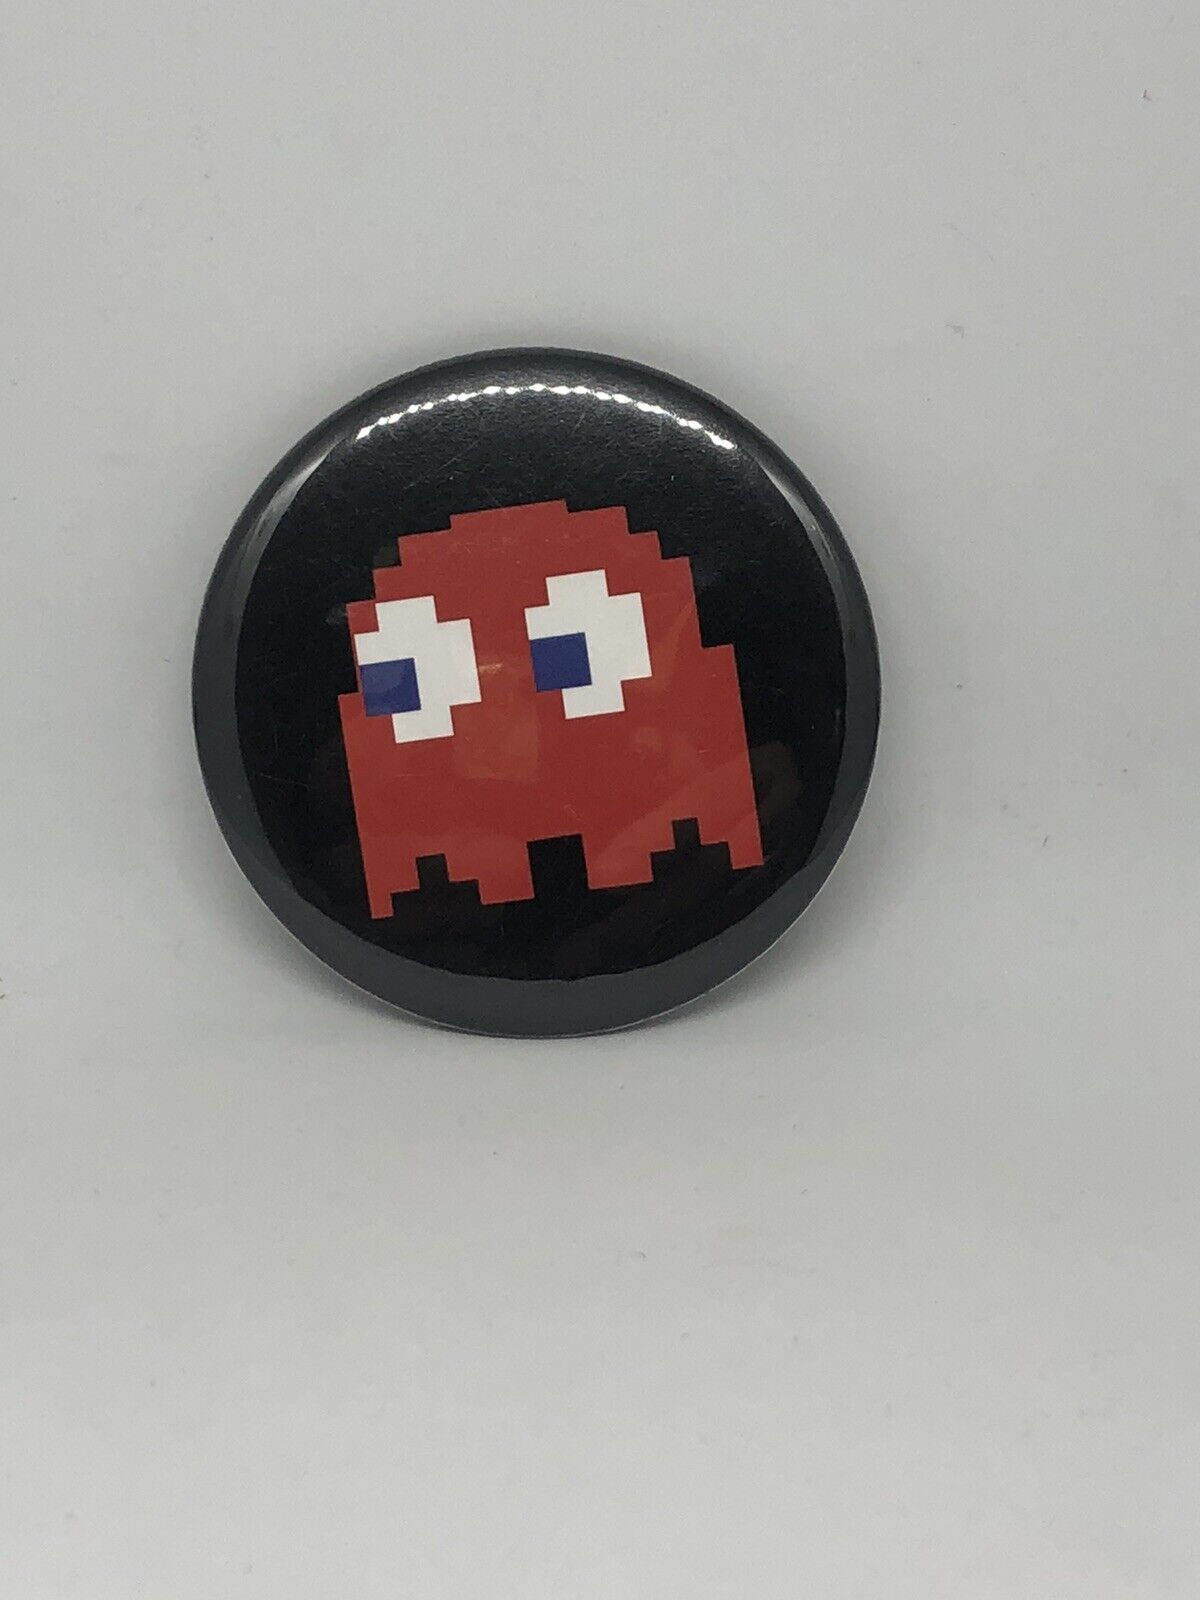 Vintage 80s Pac Man Red Blinky Button Pin 3